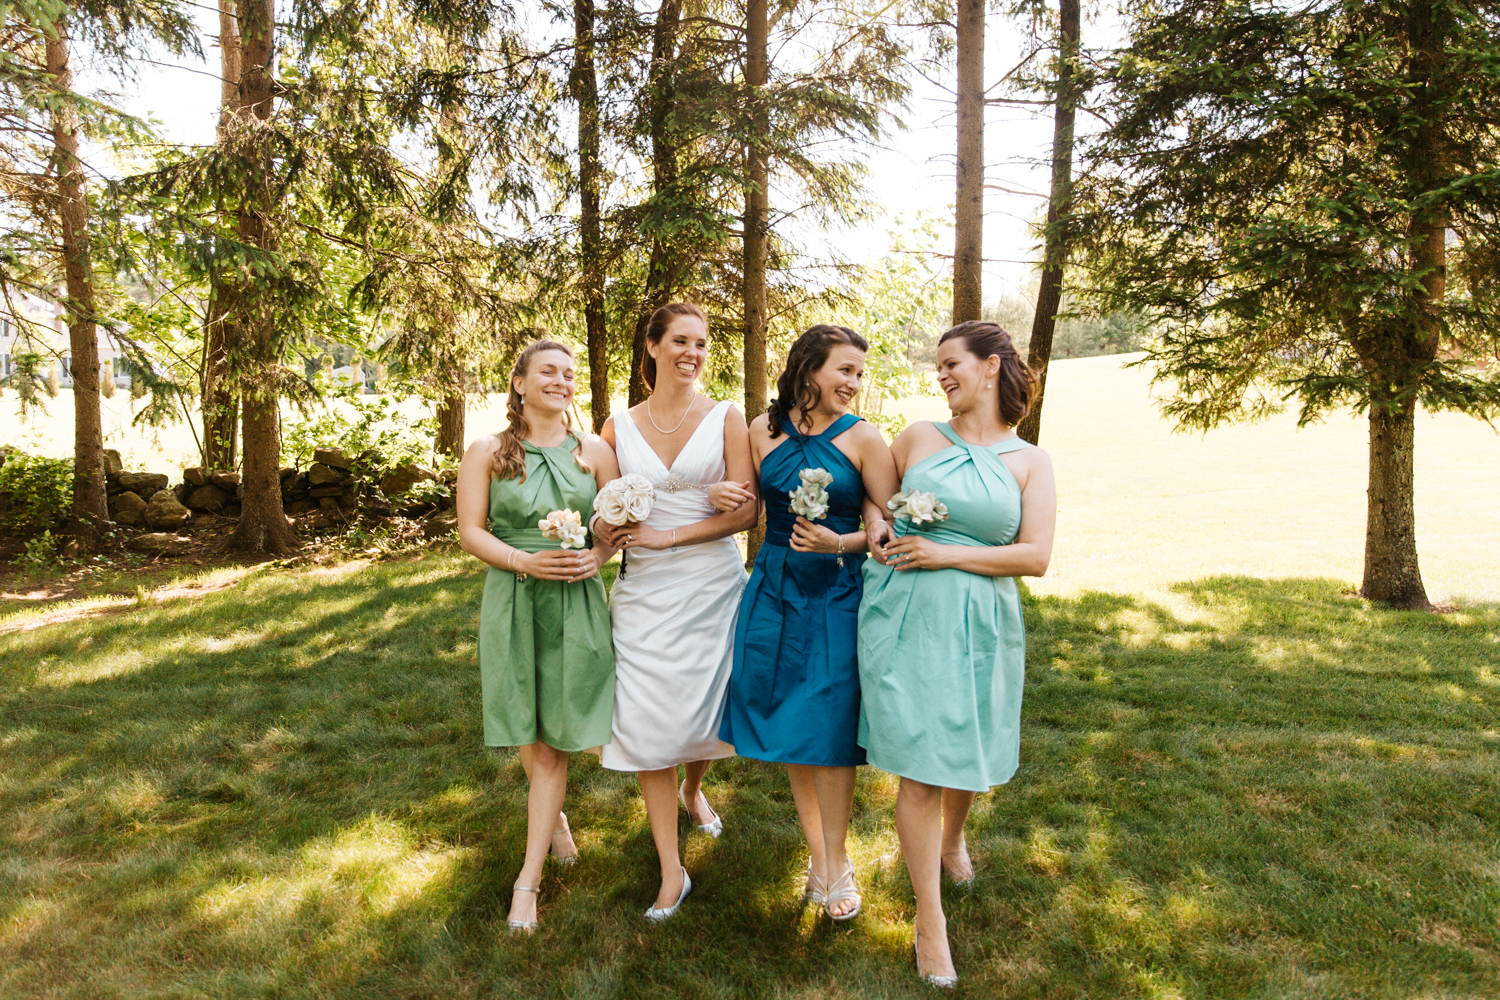 brides-maids-different-color-dresses-colorful-summer-wedding-rehboth-new-england-francis-farm .jpg